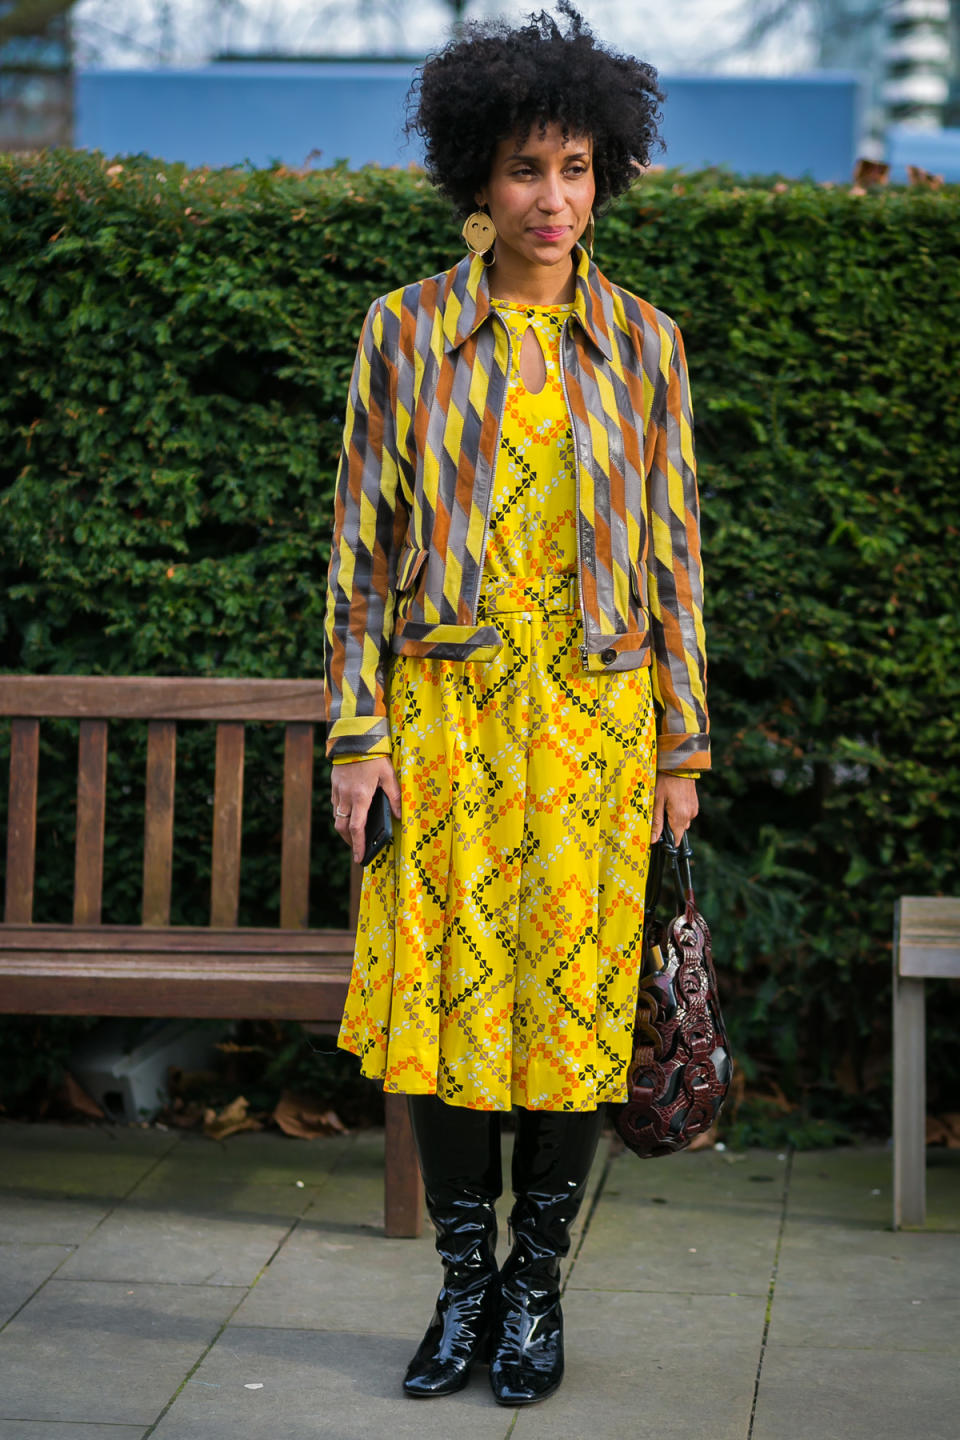 Vogue editor Chioma Nnadi shows off her way with print-mixing in a yellow dress and patchwork jacket.